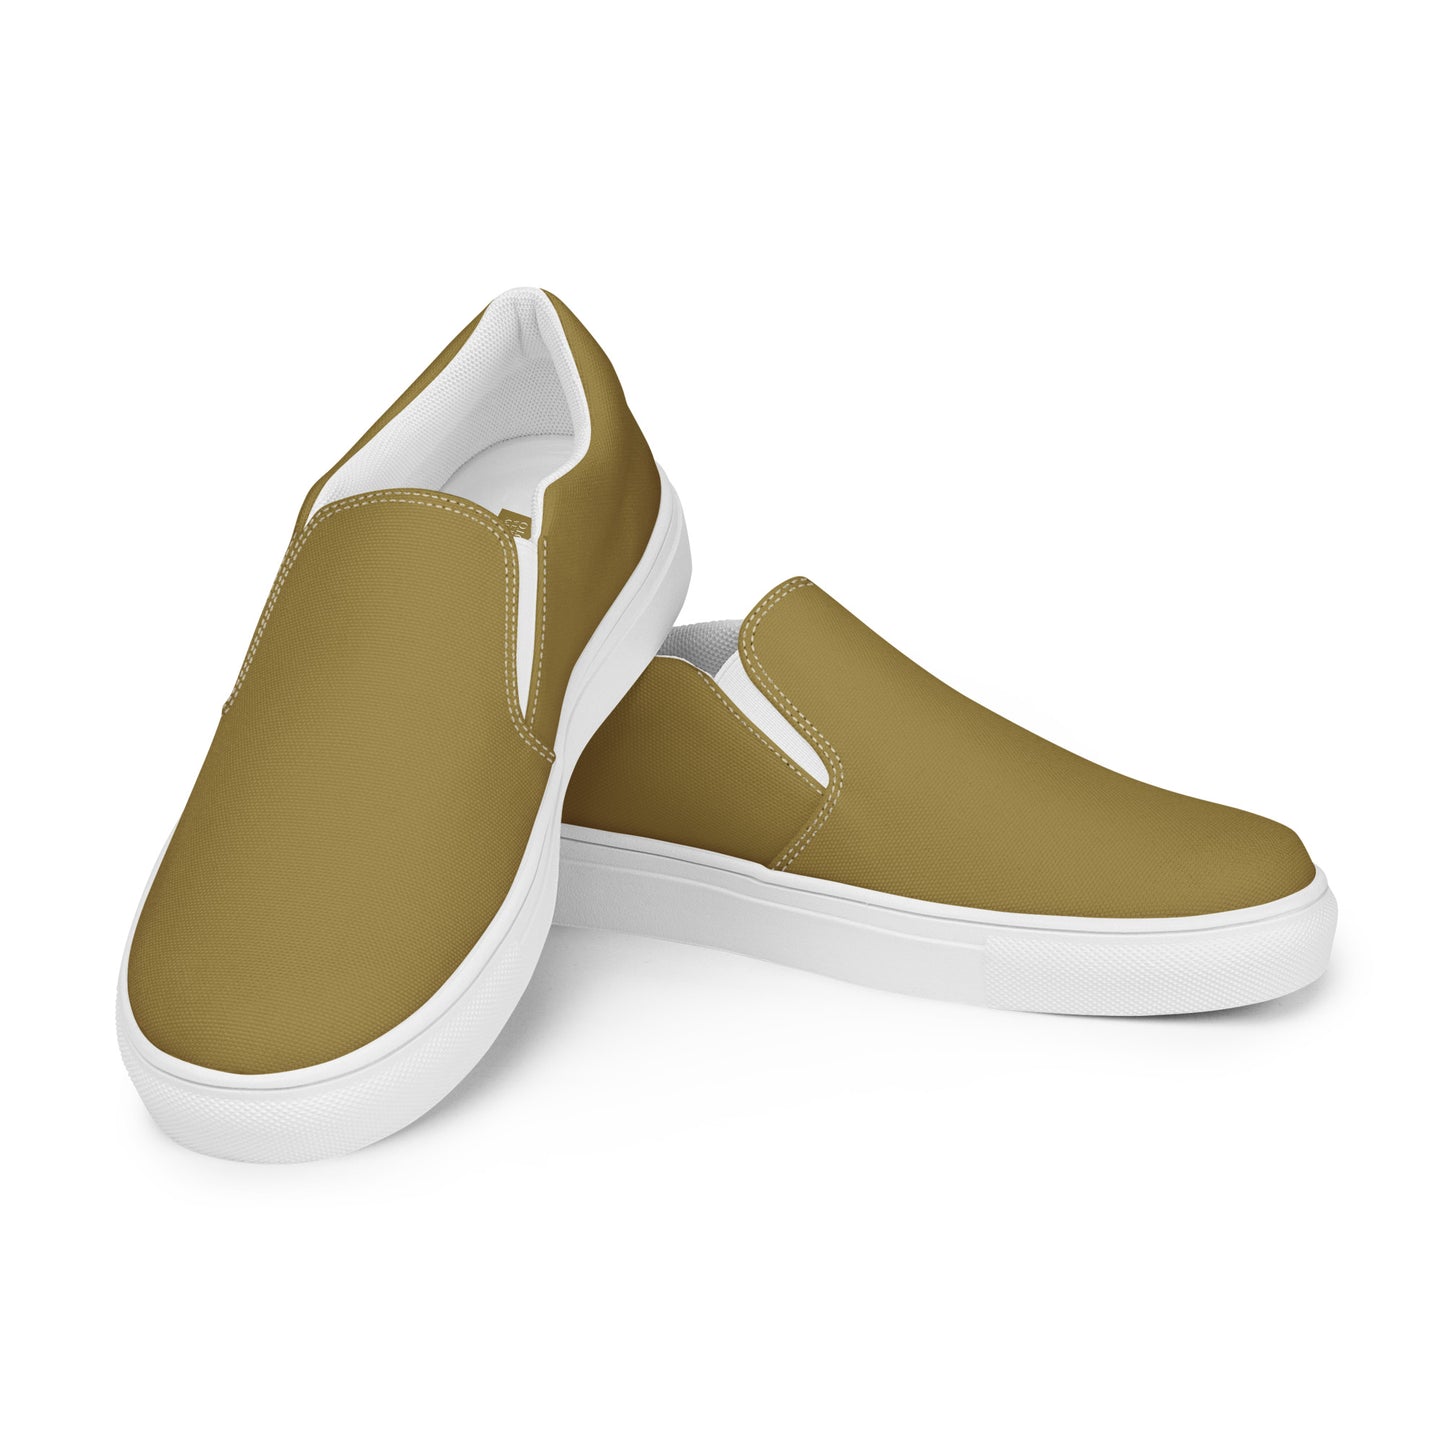 Goldie - Sustainably Made Women's  Slip-On Canvas Shoes